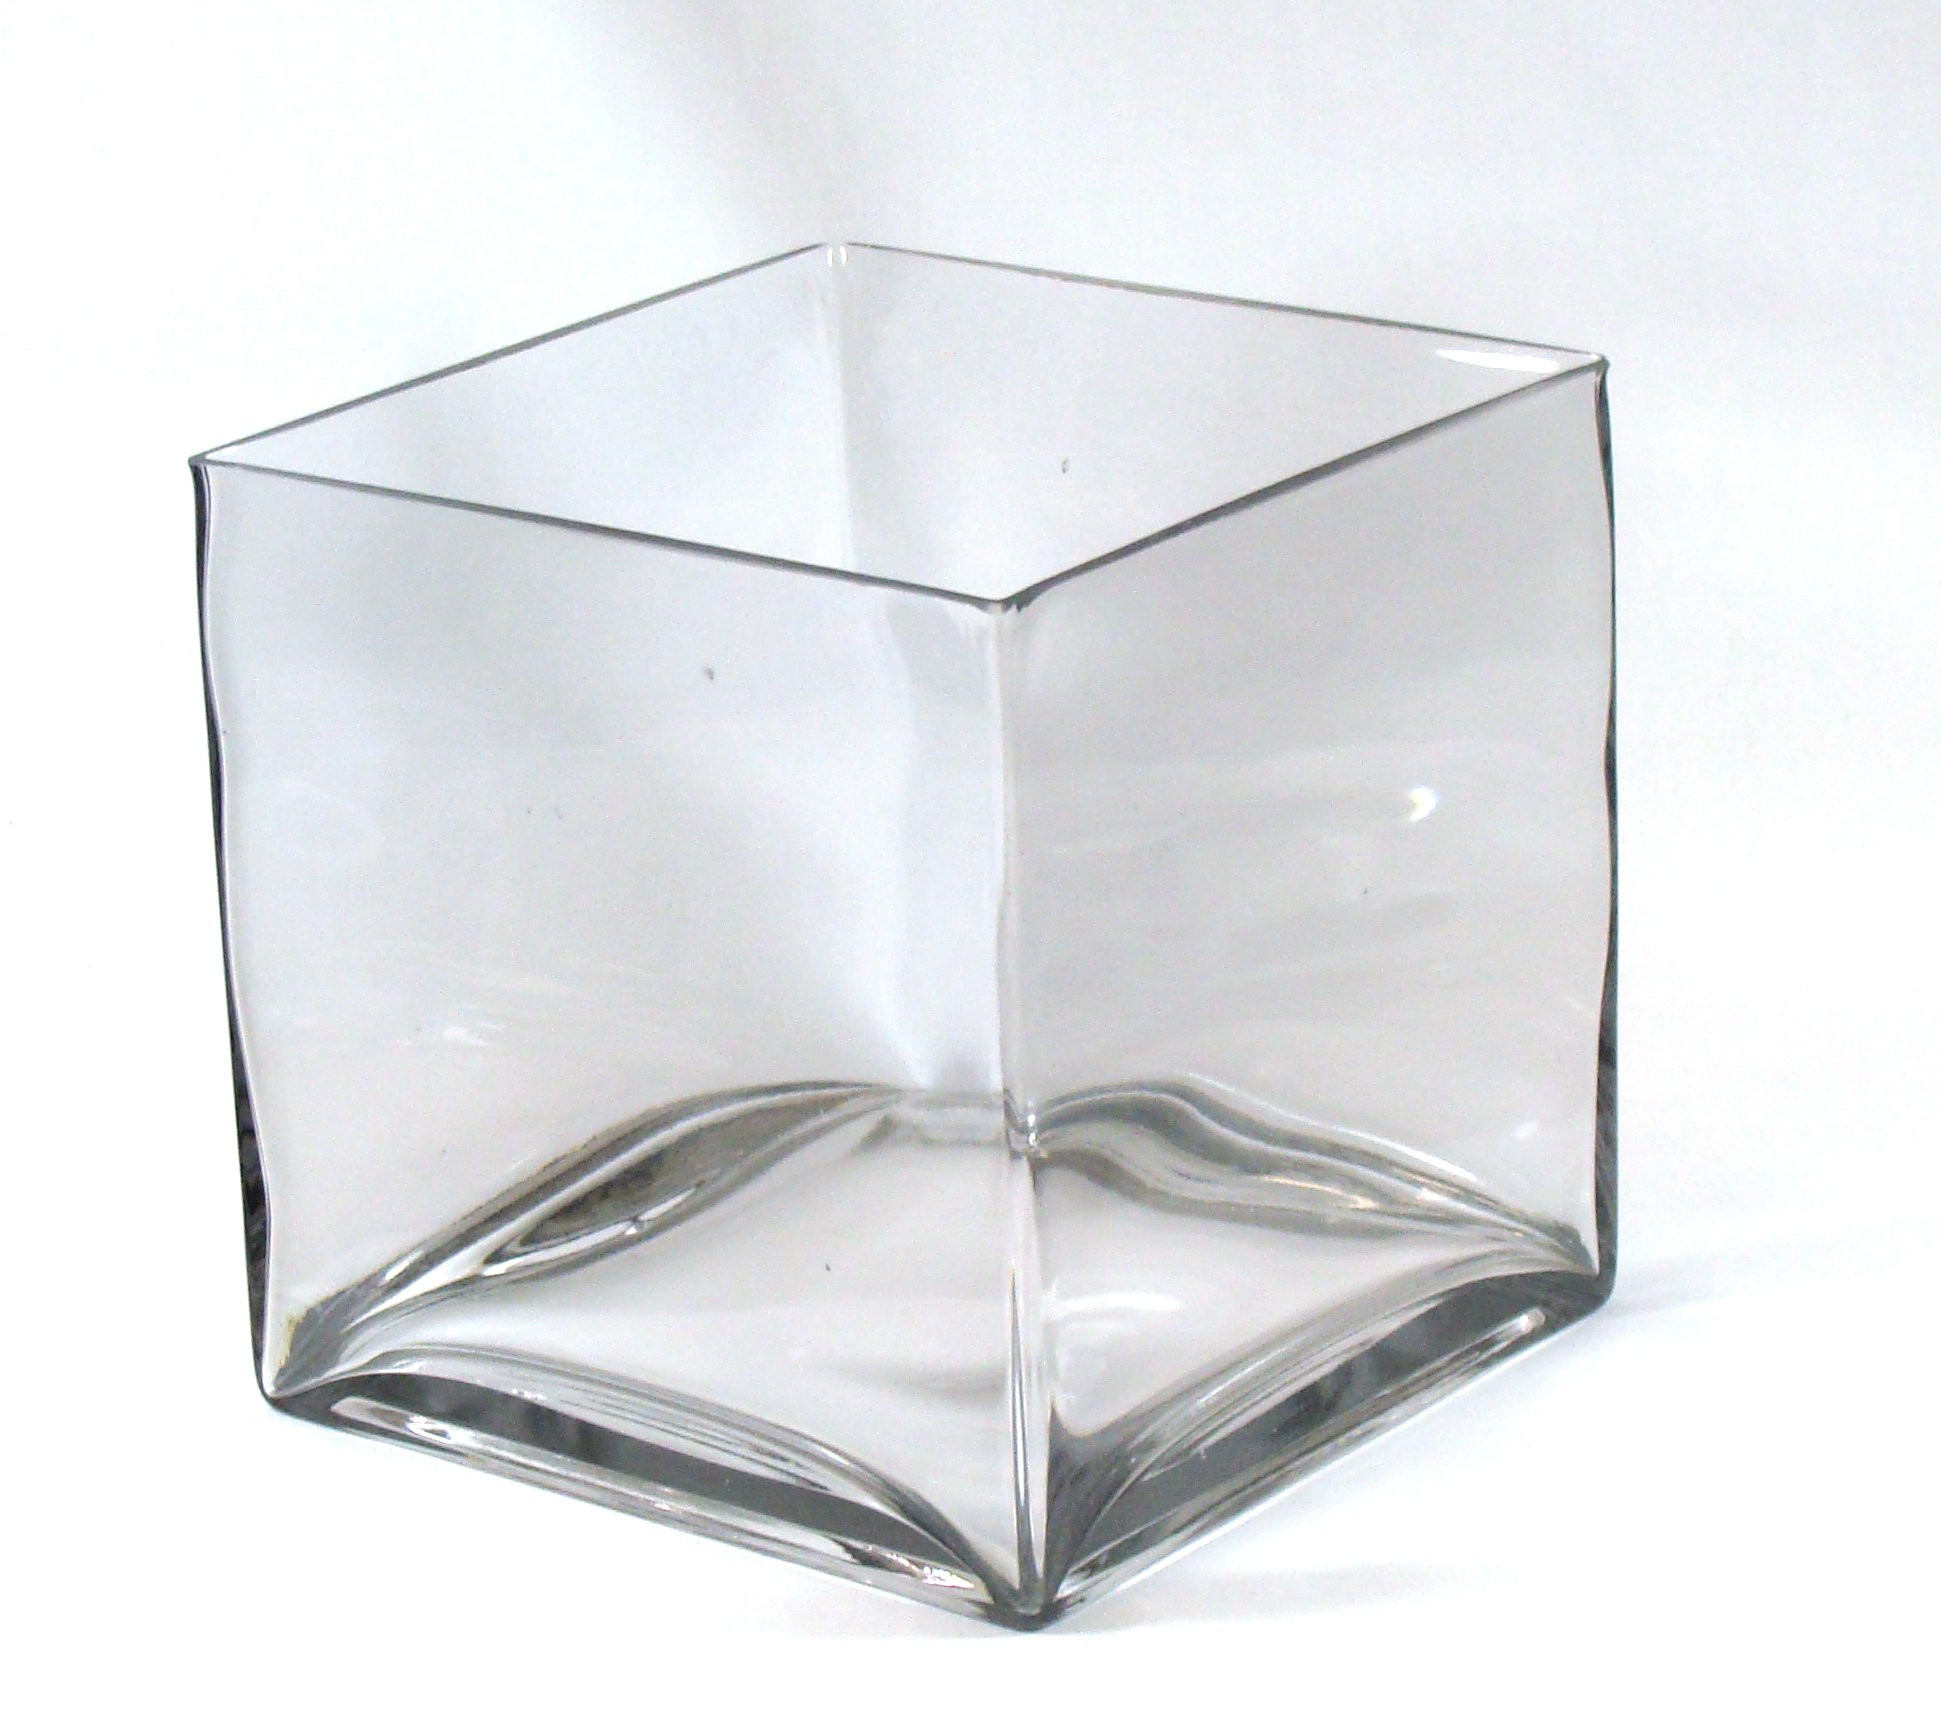 15 Famous Large Tall Glass Vase 2024 free download large tall glass vase of buy 8 inch round large glass vase 8 clear cylinder oversize regarding 8 square large glass vase 8 inch clear cube oversize centerpiece 8x8x8 candleholder